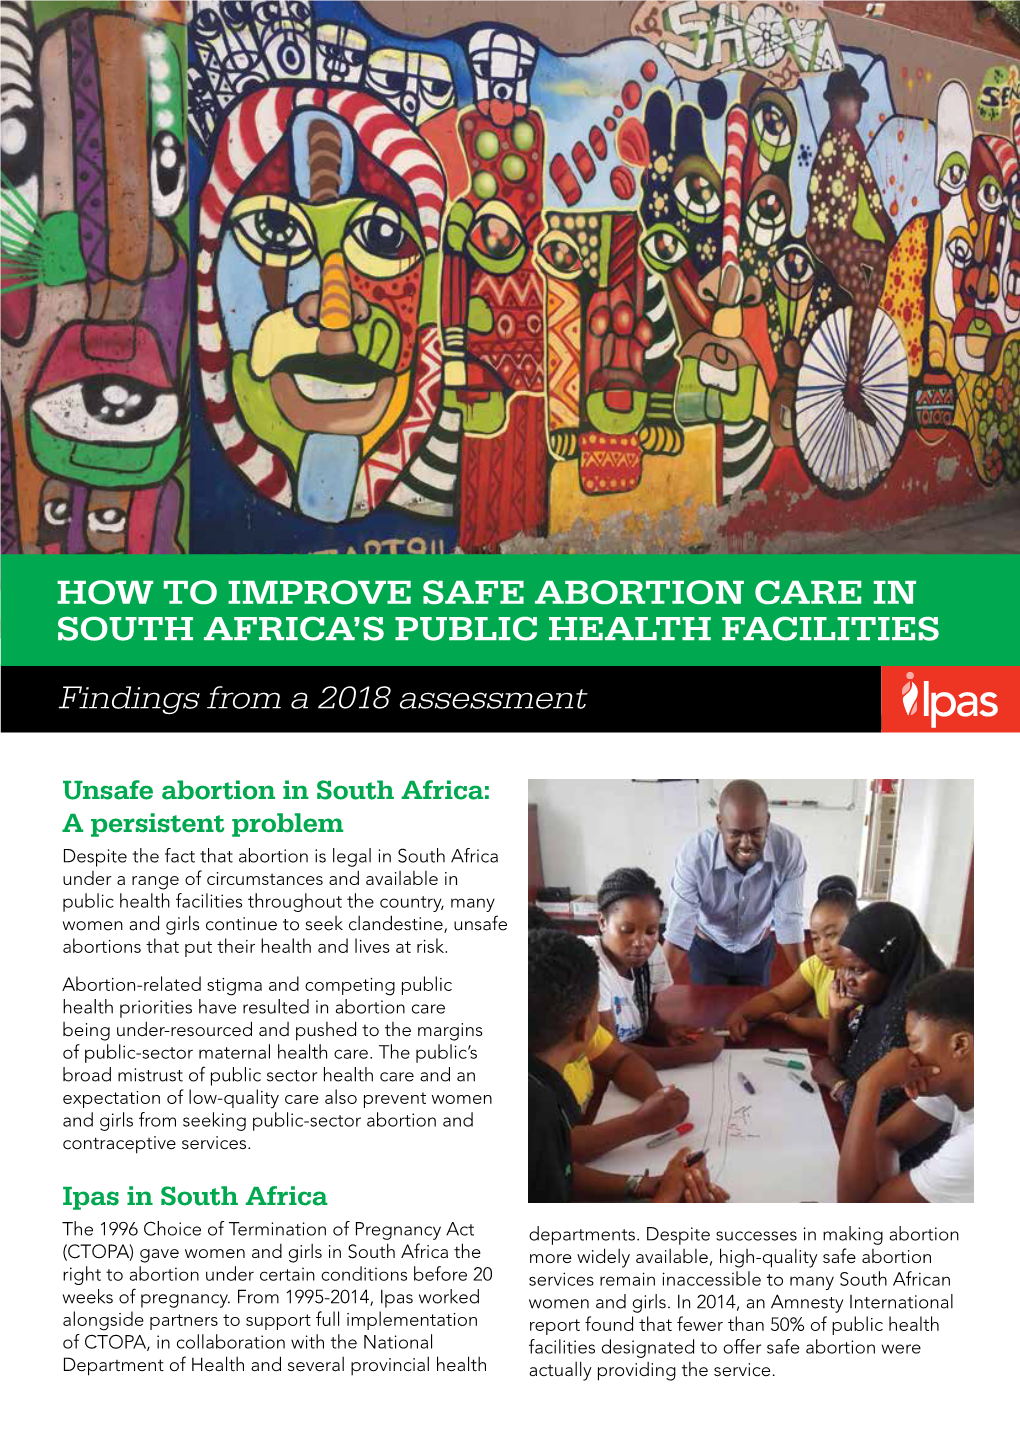 How to Improve Safe Abortion Care in South Africa's